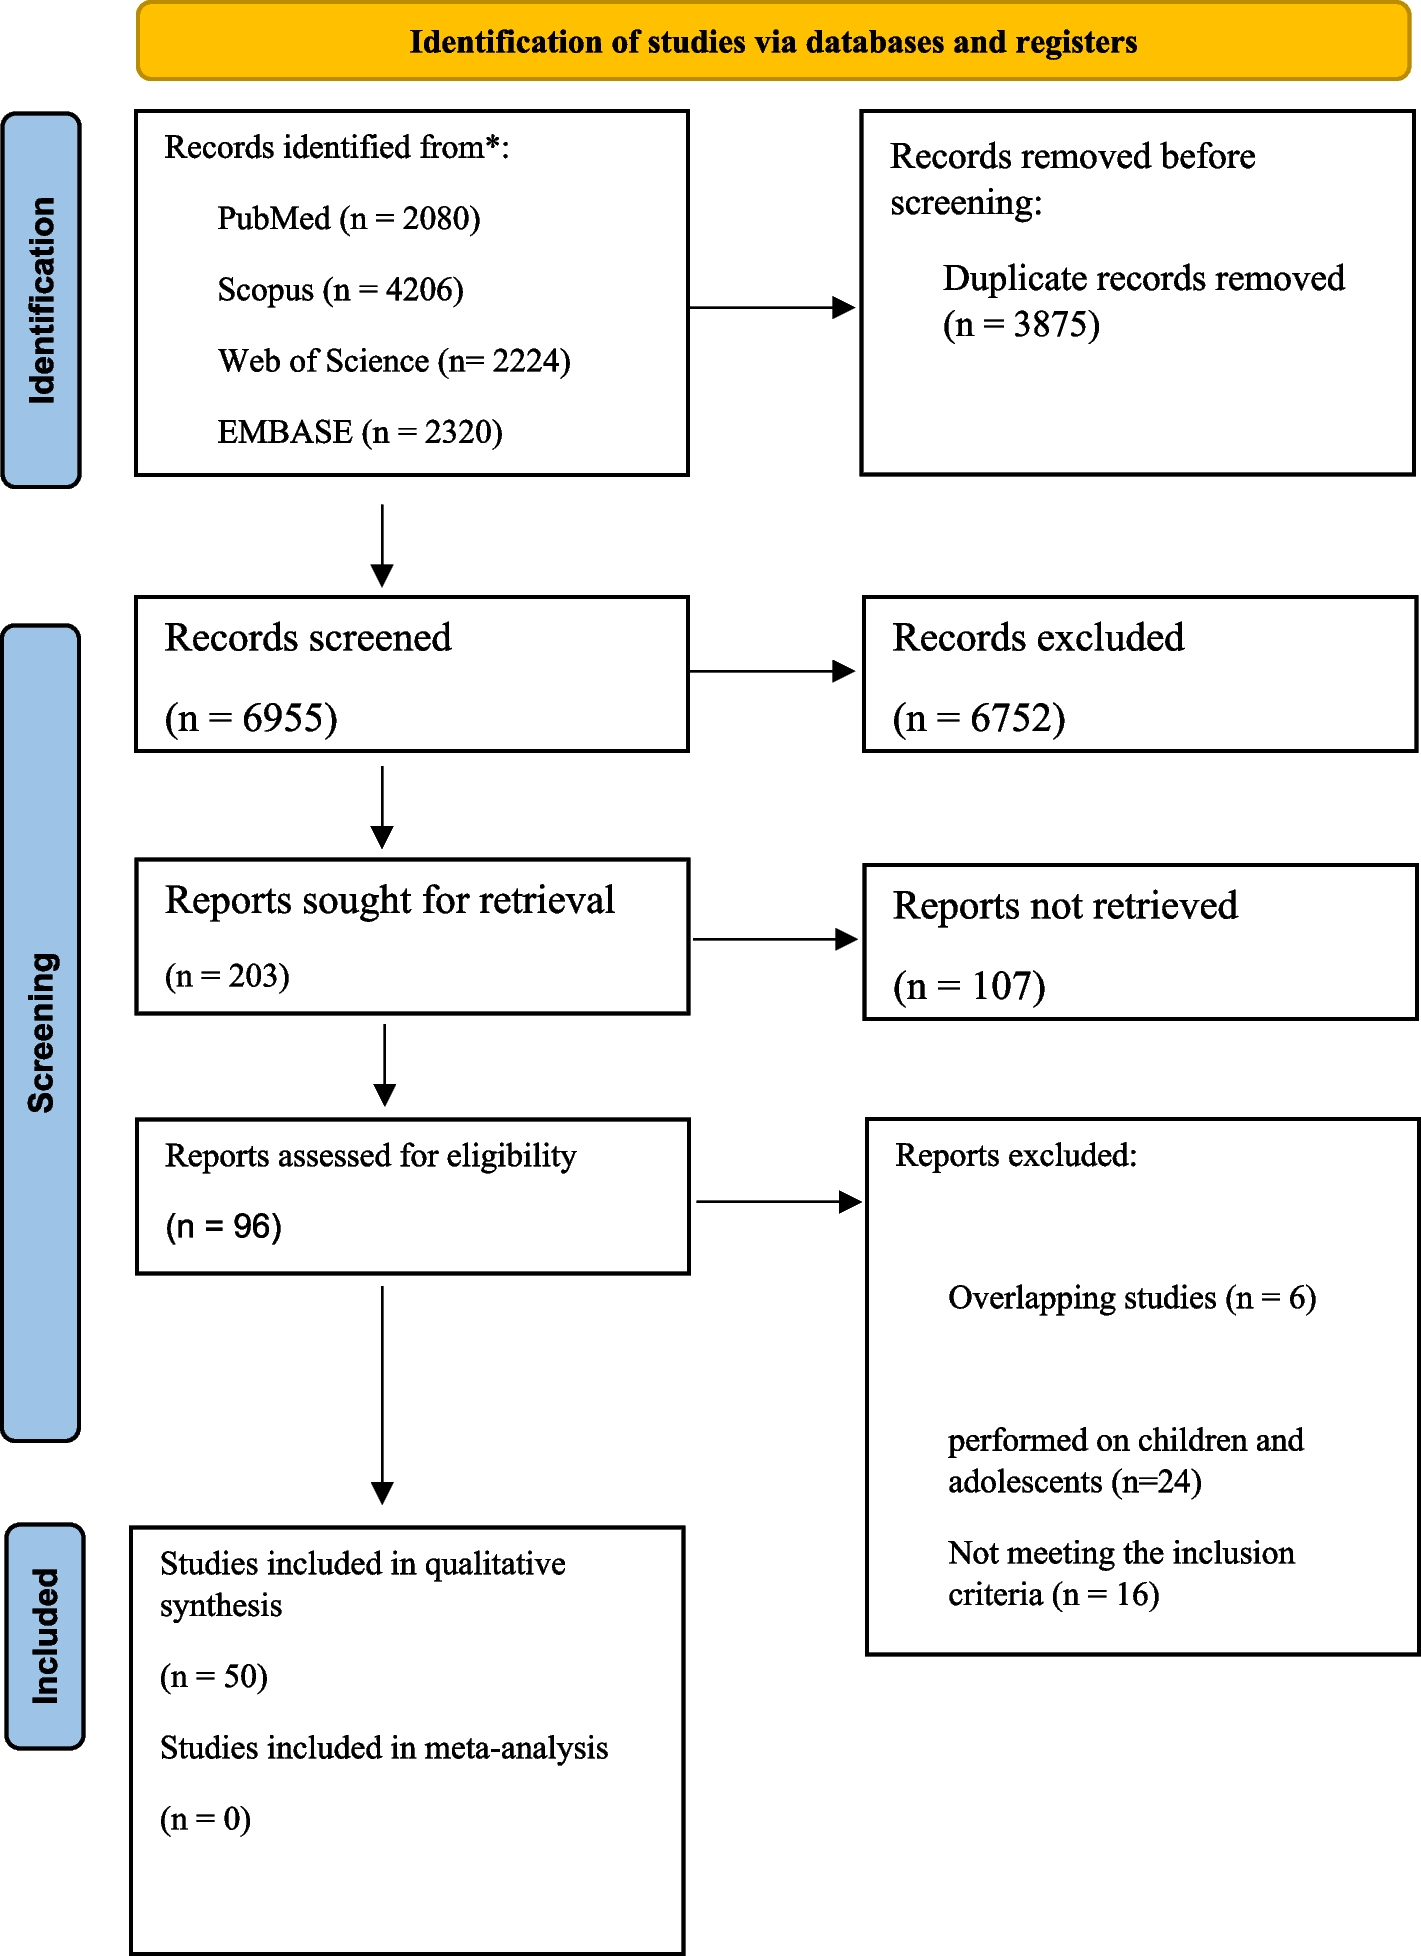 Genetic determinants of food preferences: a systematic review of observational studies